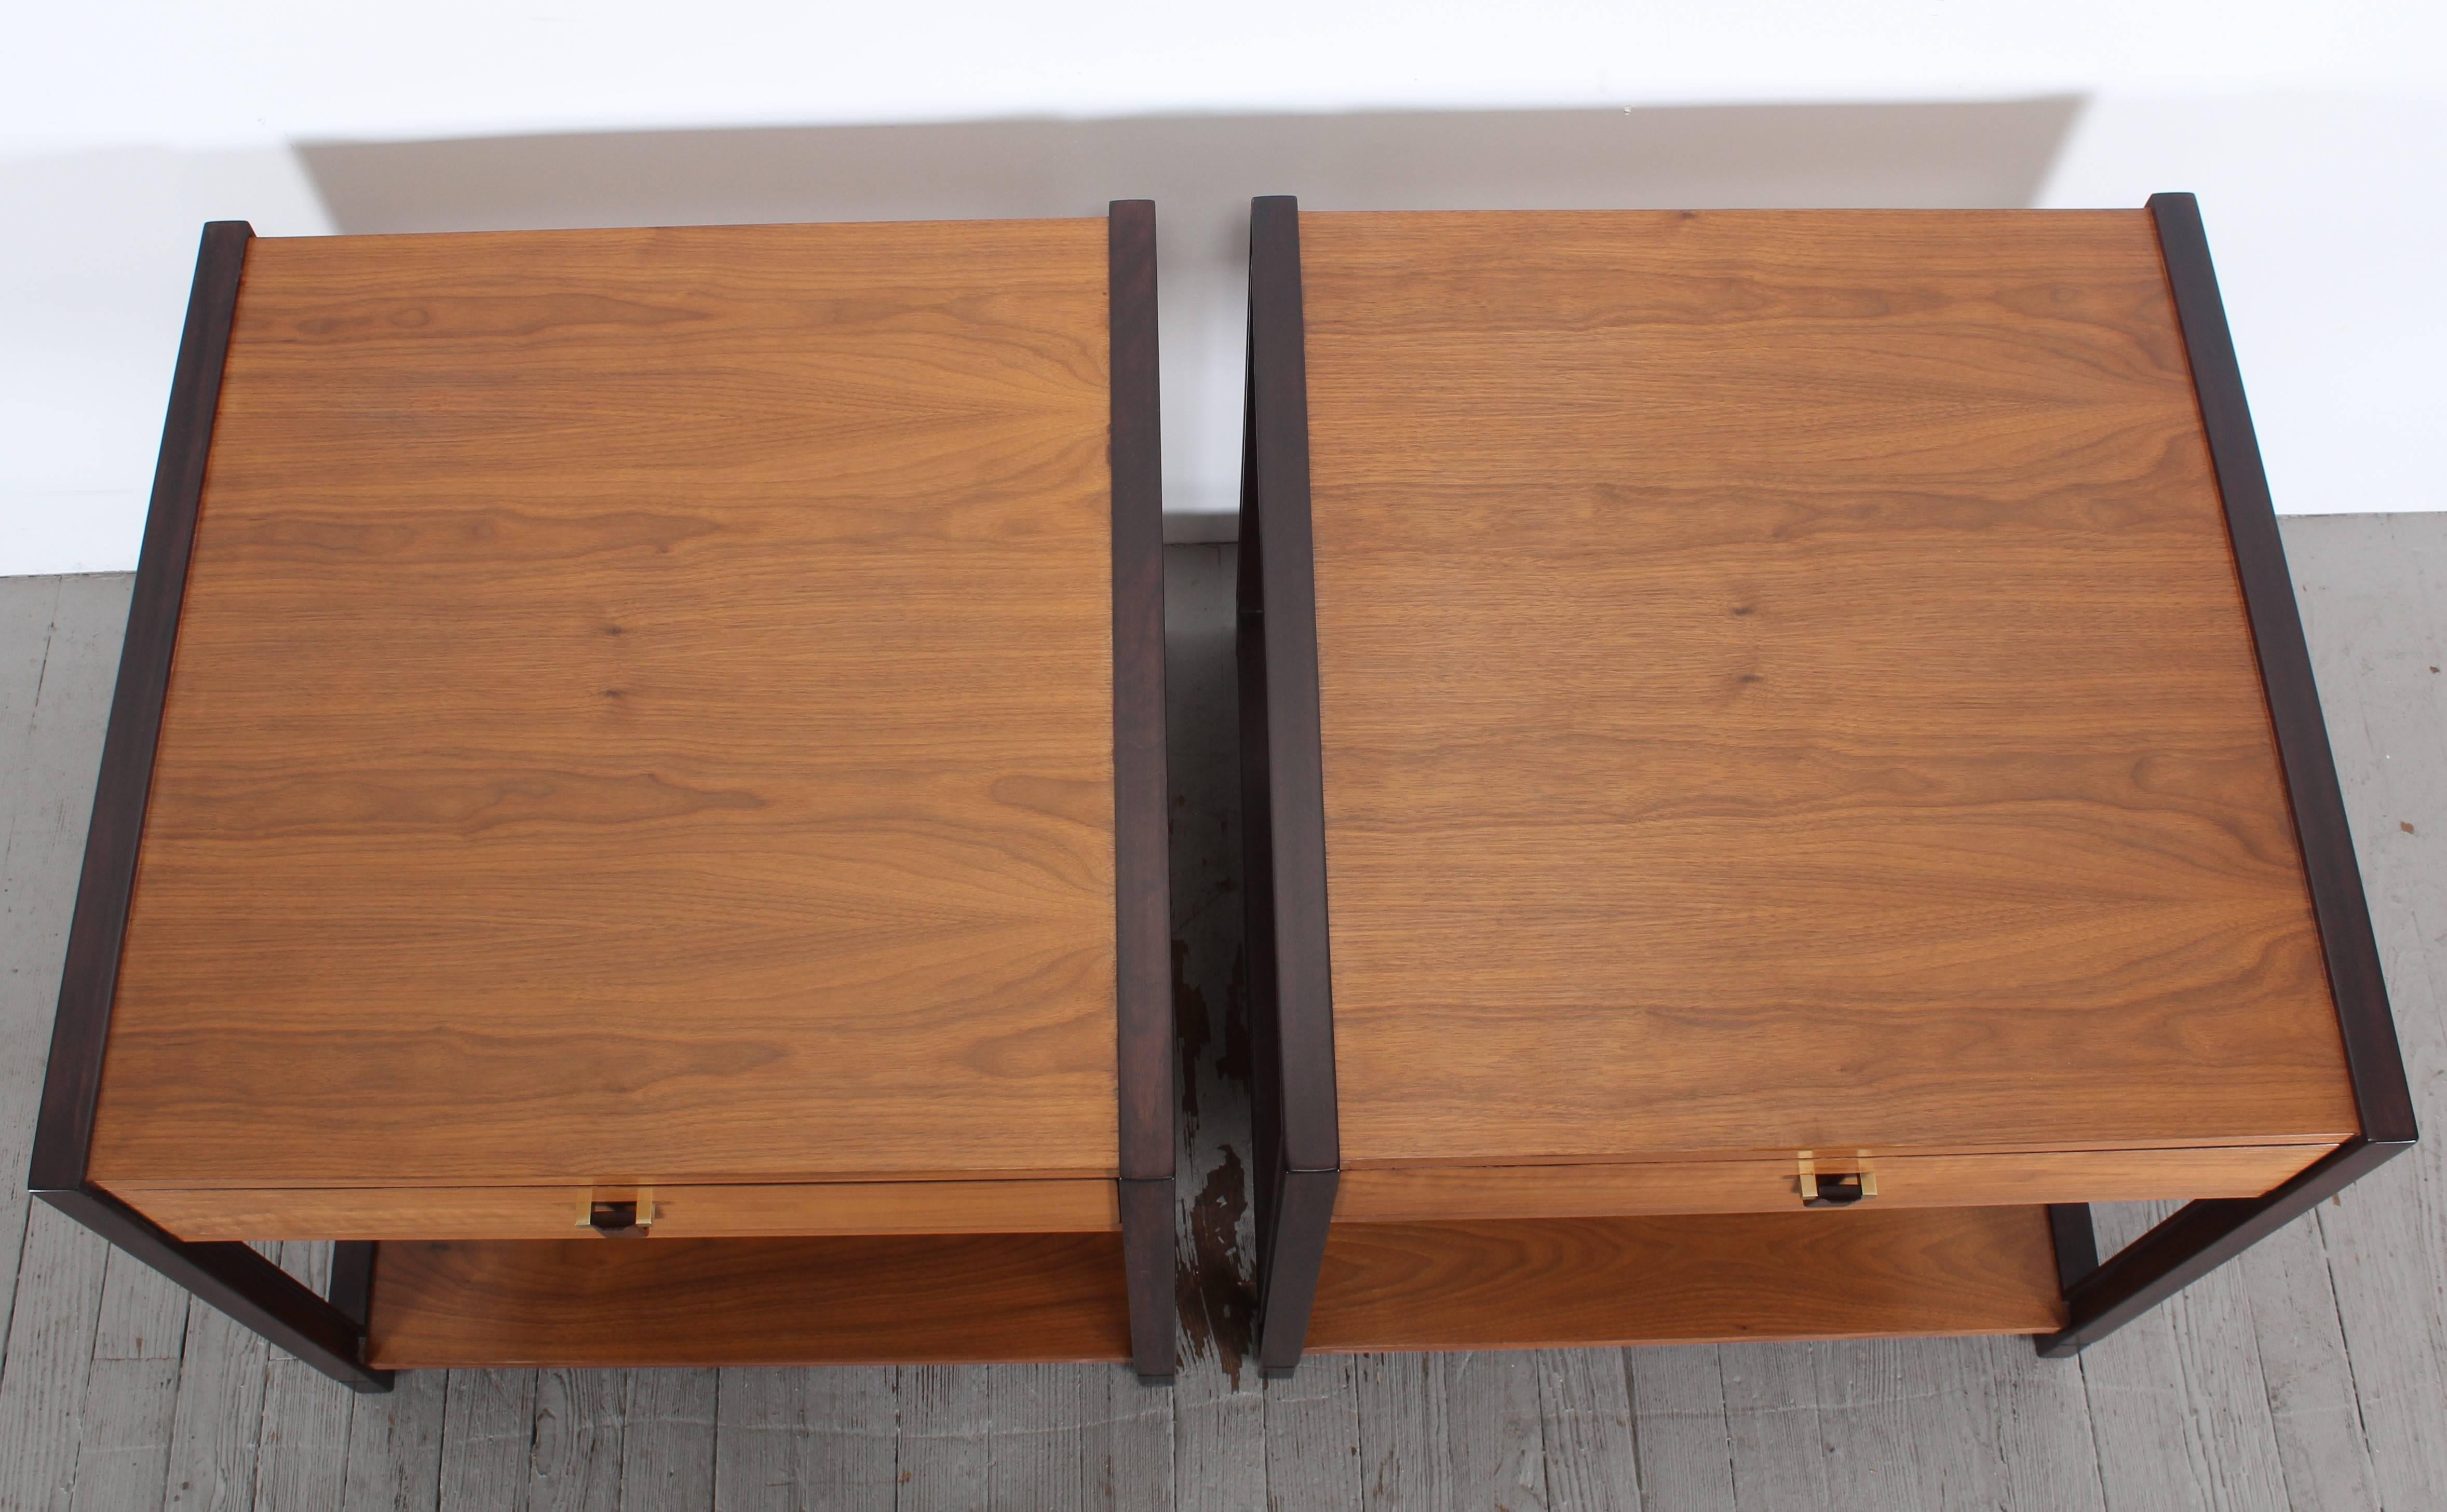 American Pair of Edward Wormley Nightstands or End Tables By Dunbar, 1960s